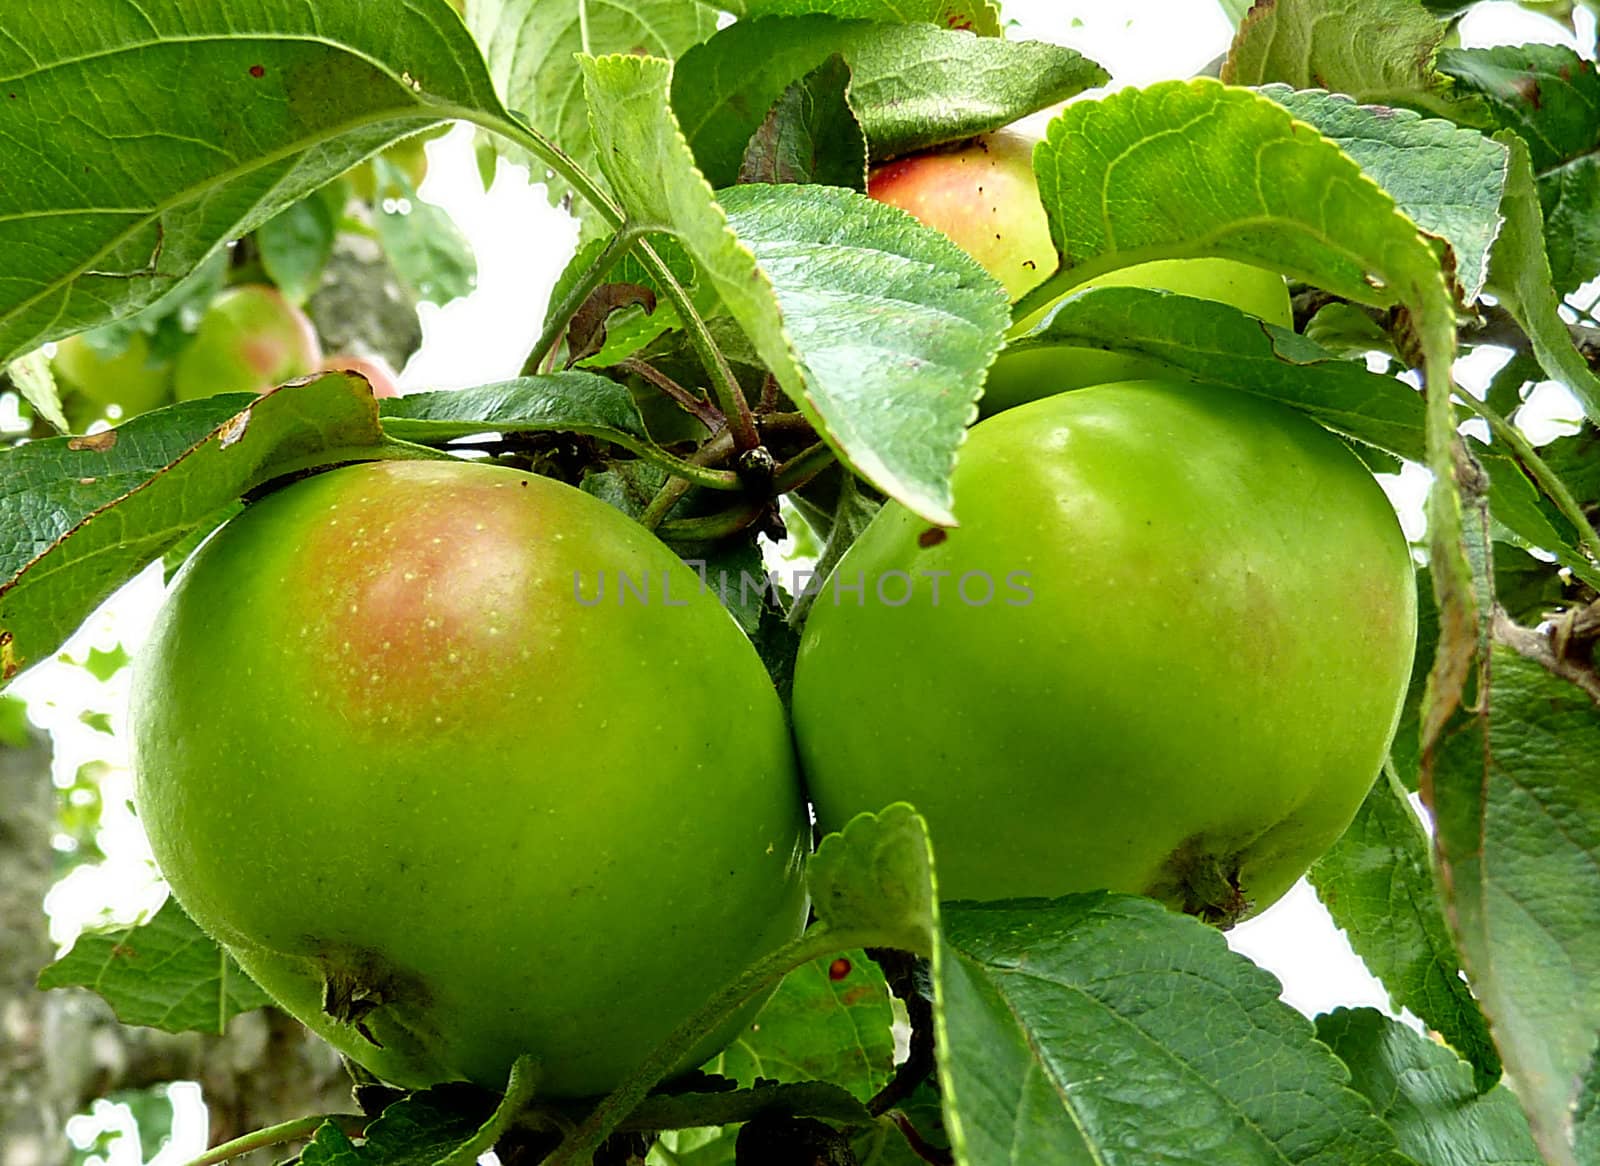 Green apples surrounded by leaves on a tree